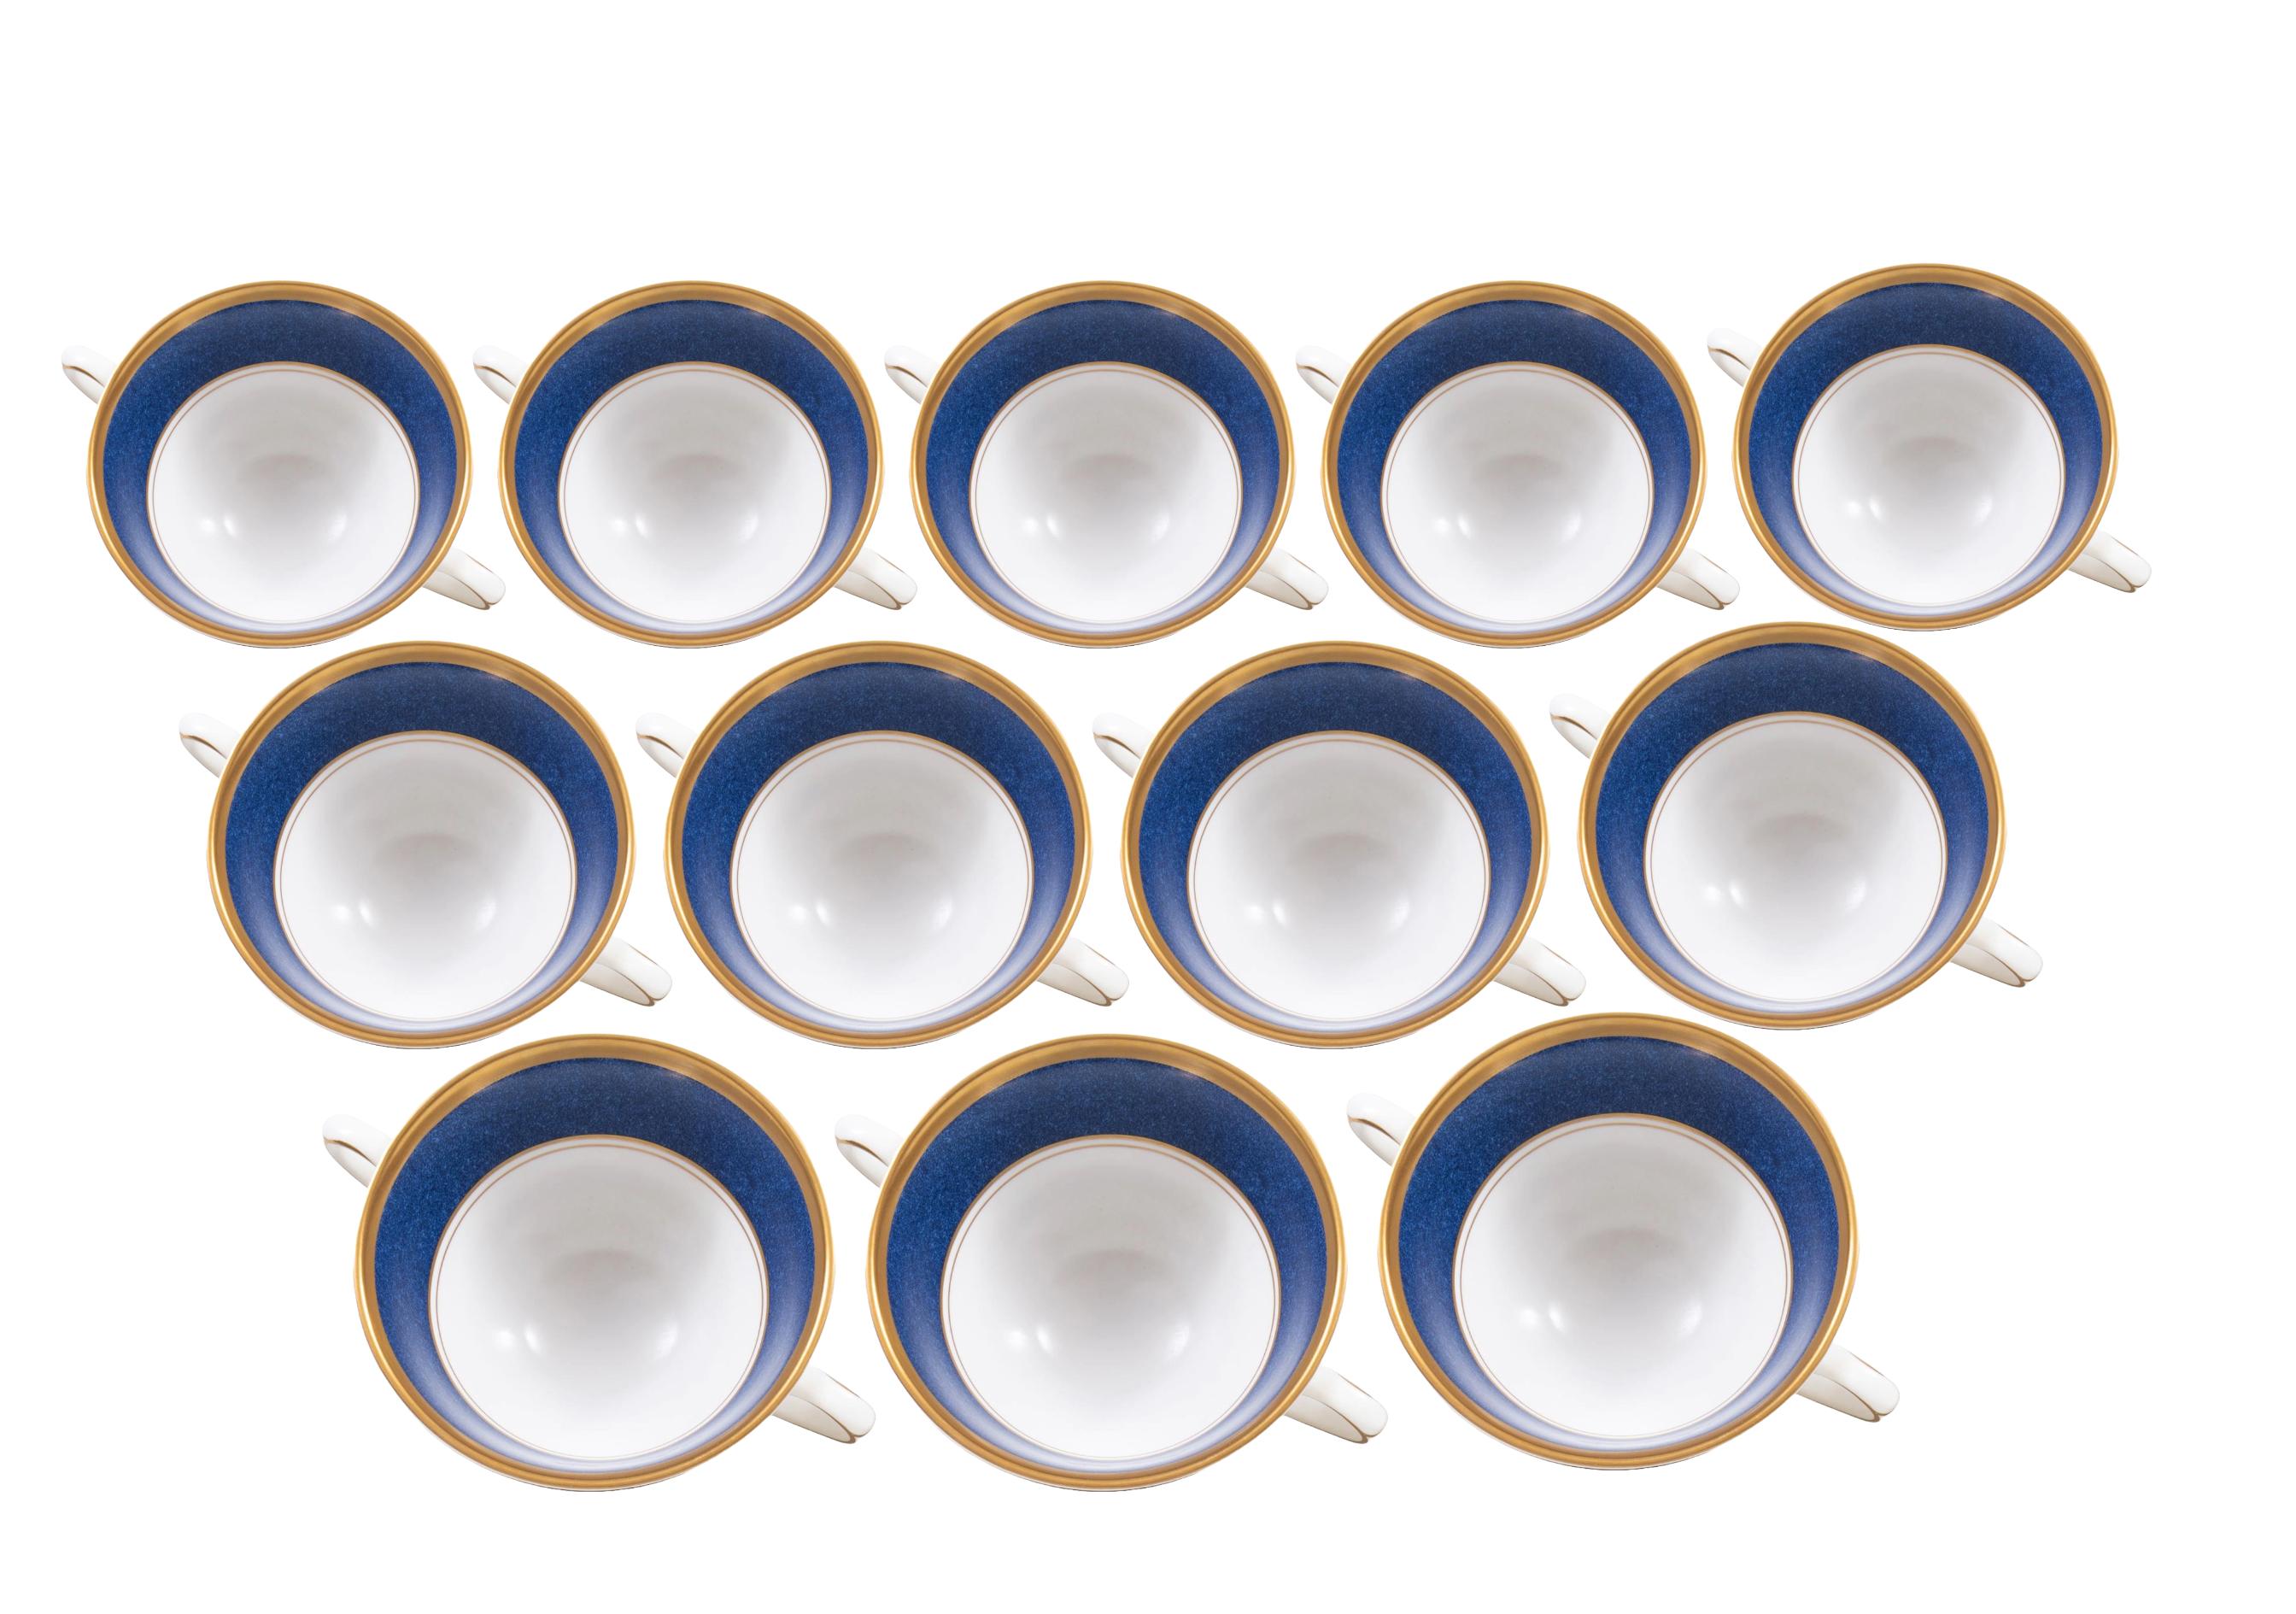 Complete English Porcelain Dinner Service For 12 People With Coffee/Tea Service For Sale 9